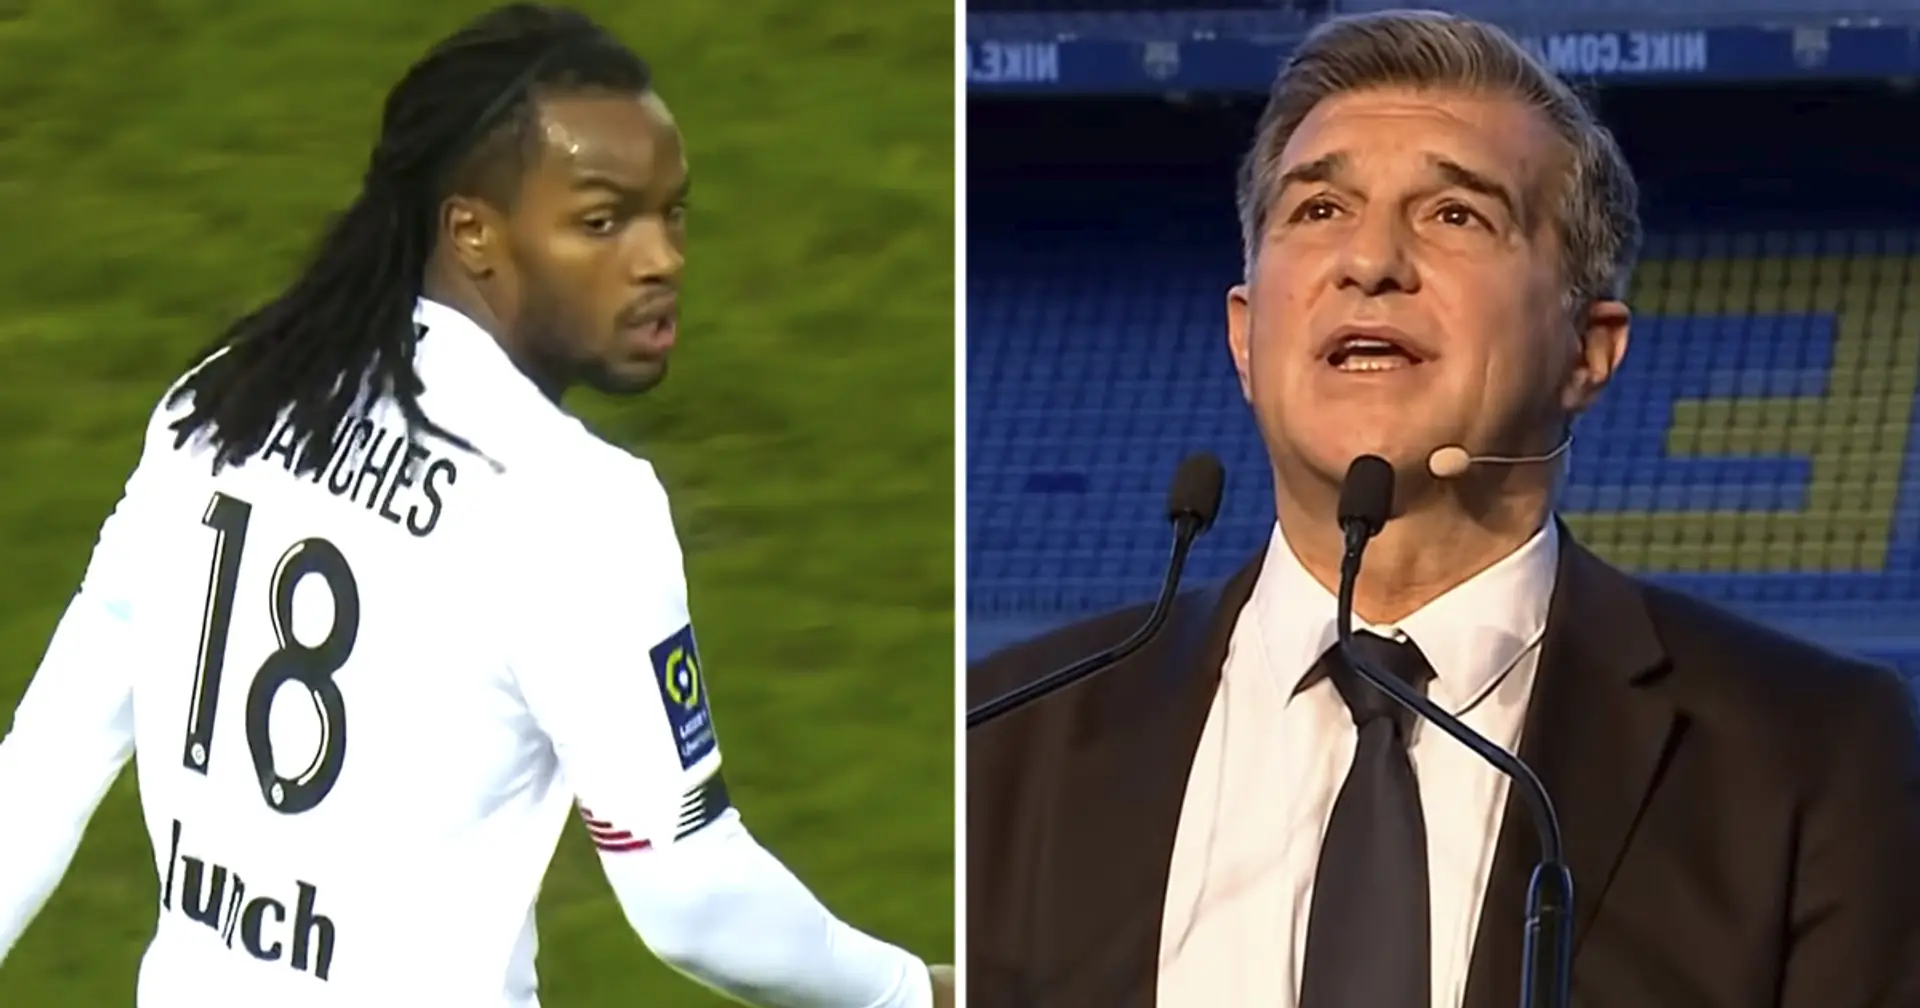 Laporta meets Lille director to discuss Renato Sanches deal, club's stance unveiled (reliability: 4 stars)